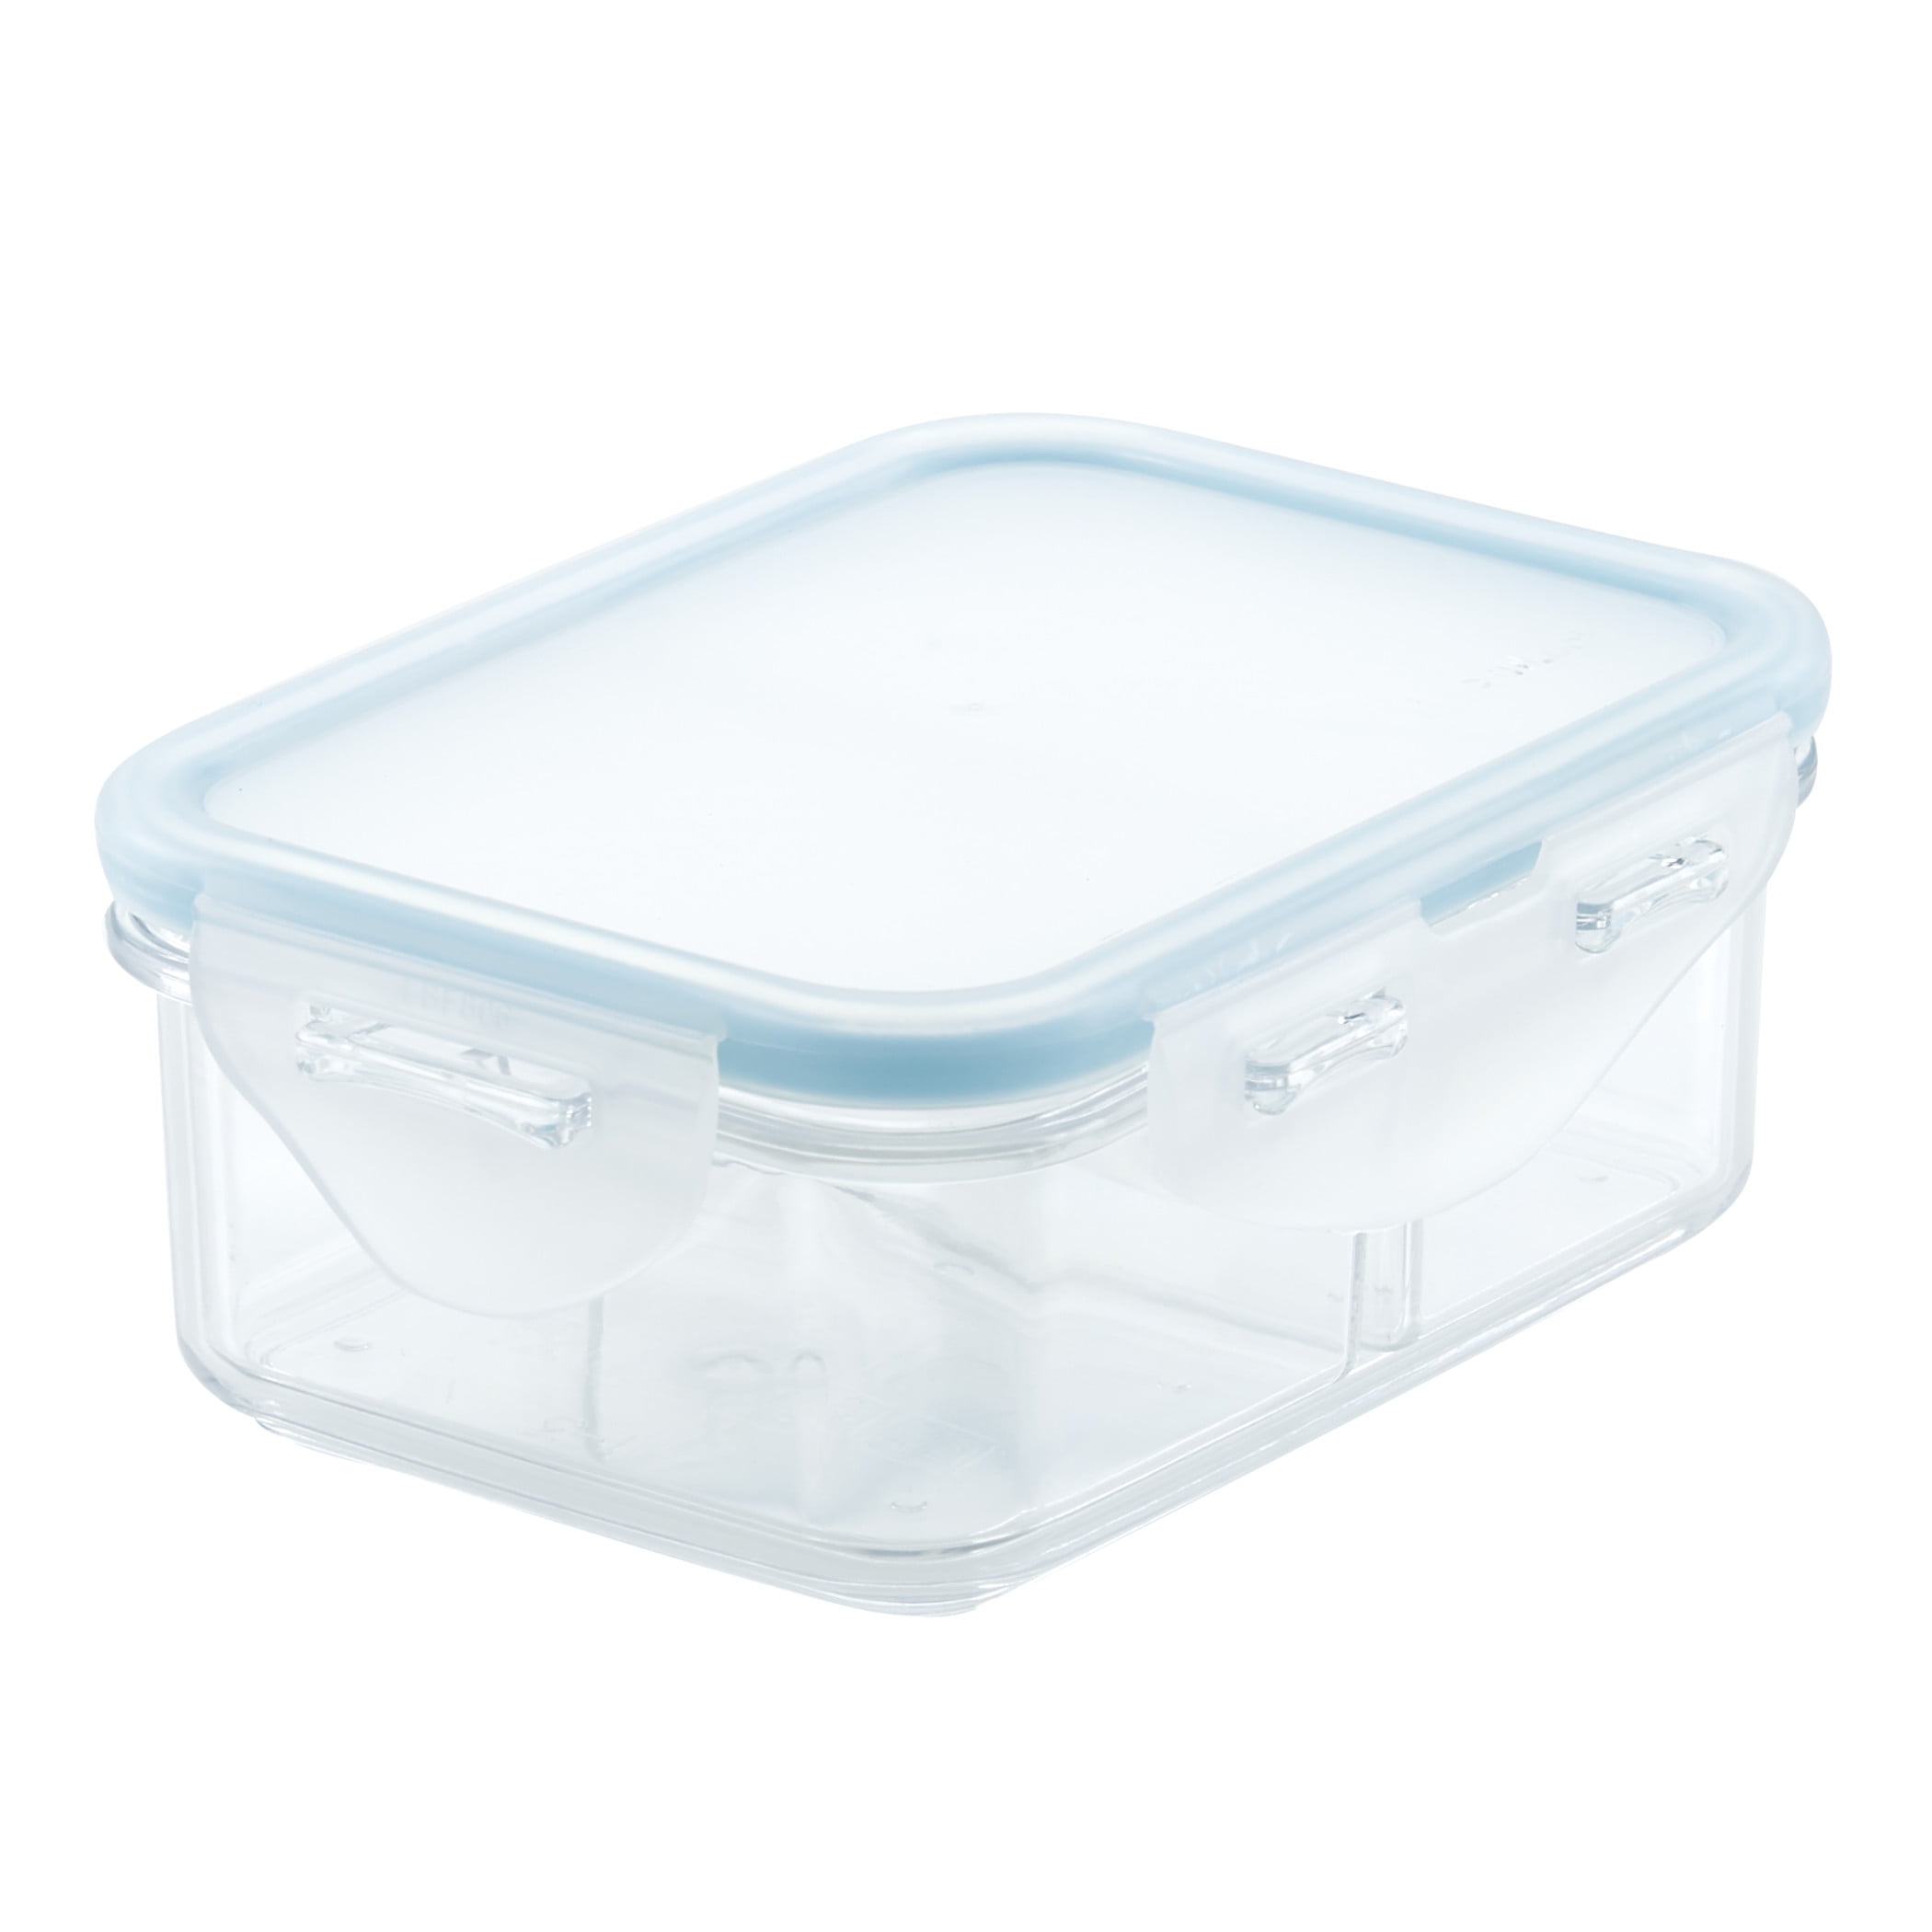 LOCK & LOCK Purely Better Tritan Food Storage Container / Square Food  Storage Bin - 29 Ounce, Clear